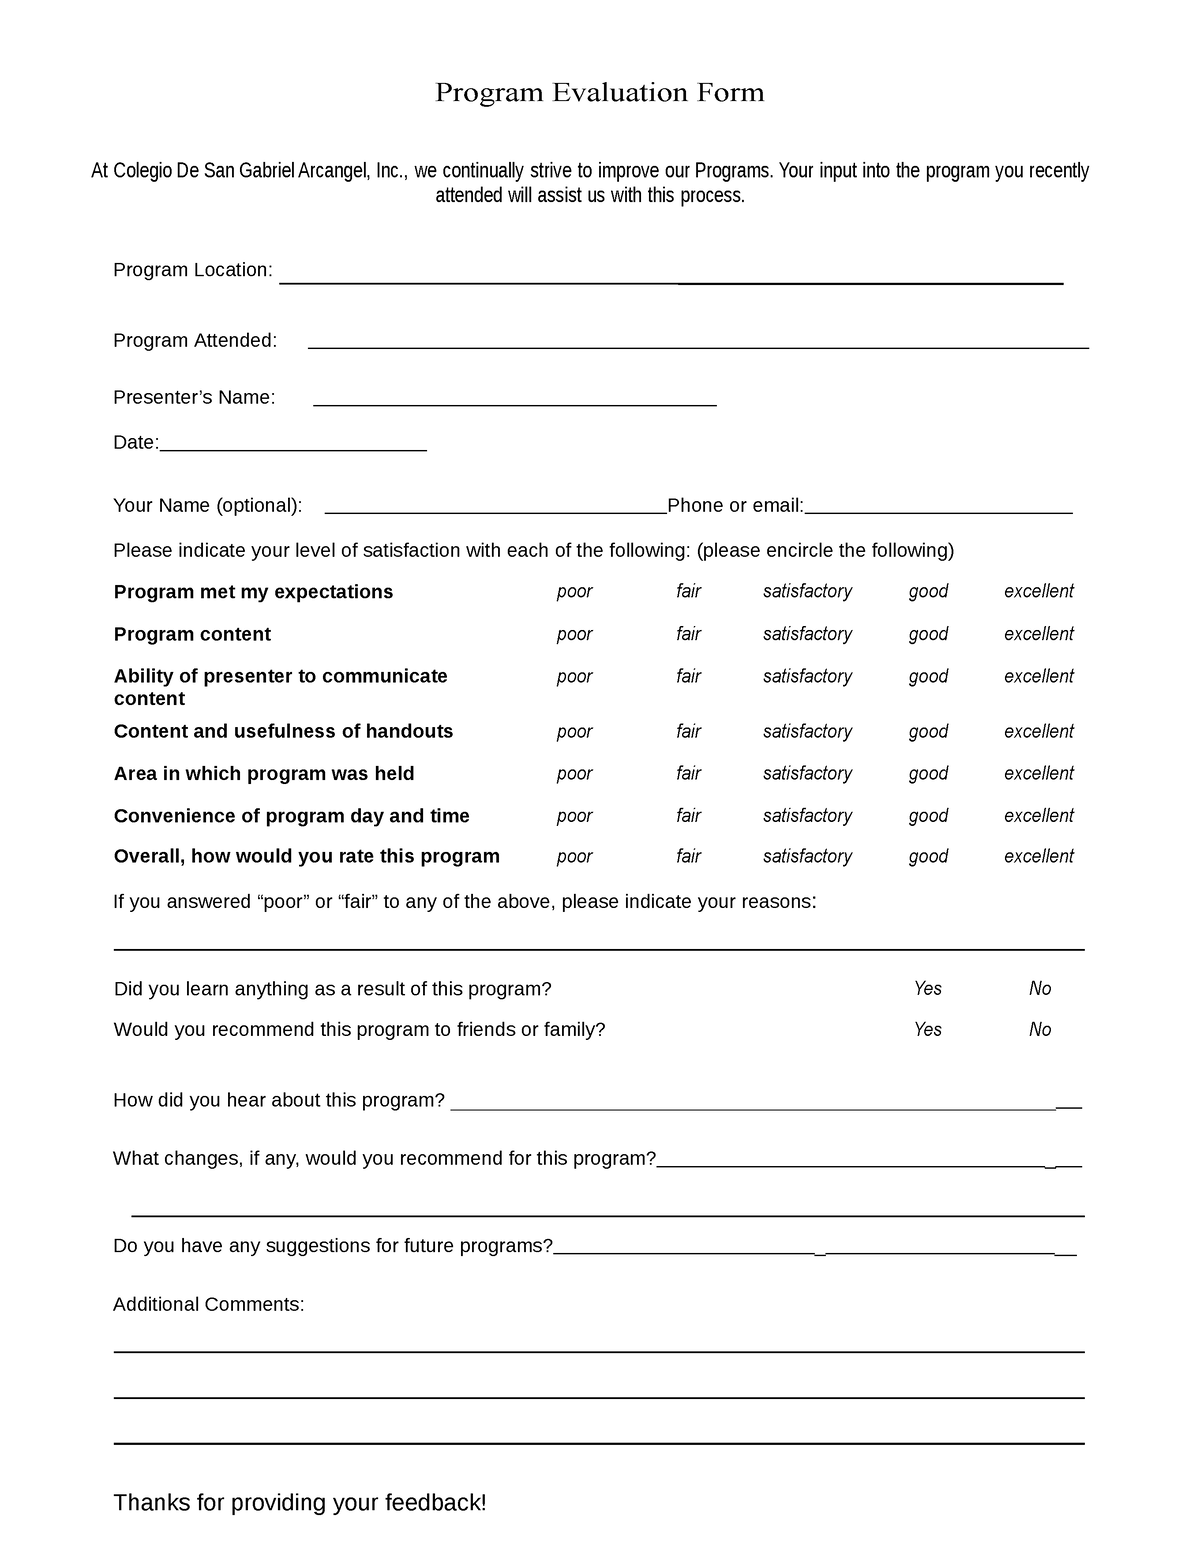 Evaluation-form - Pharmacy notes and lecture - Program Evaluation Form ...